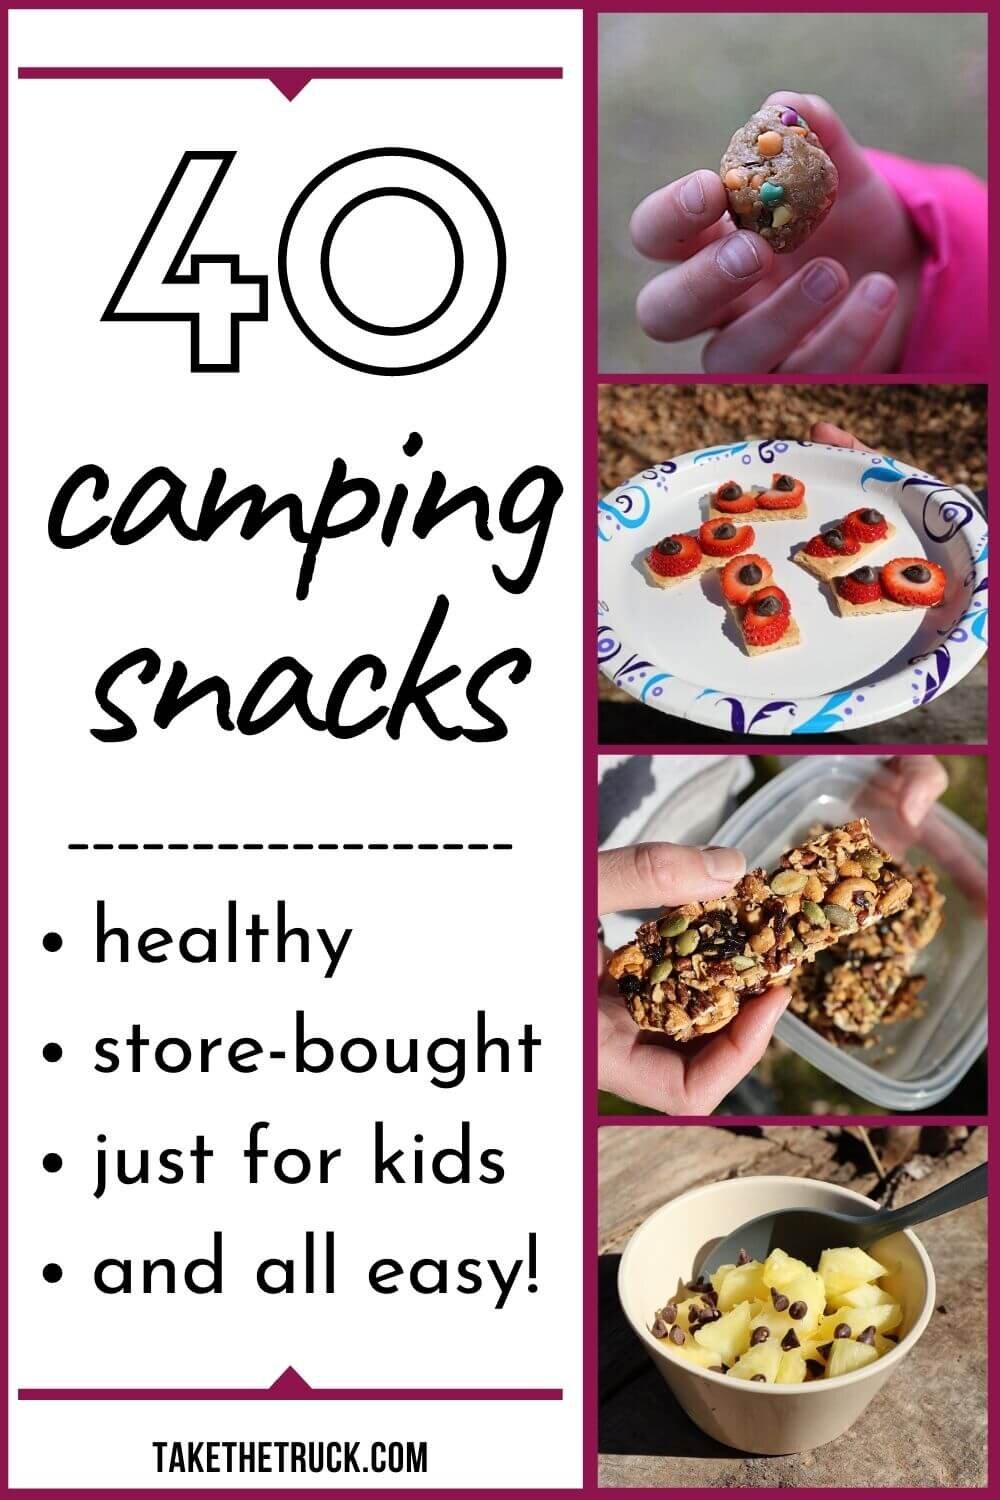 Over 30 easy camping snacks divided into: camping snacks to buy, simple camping snacks for kids, and healthy camping snacks for adults and kids. These are all simple camping snack ideas!